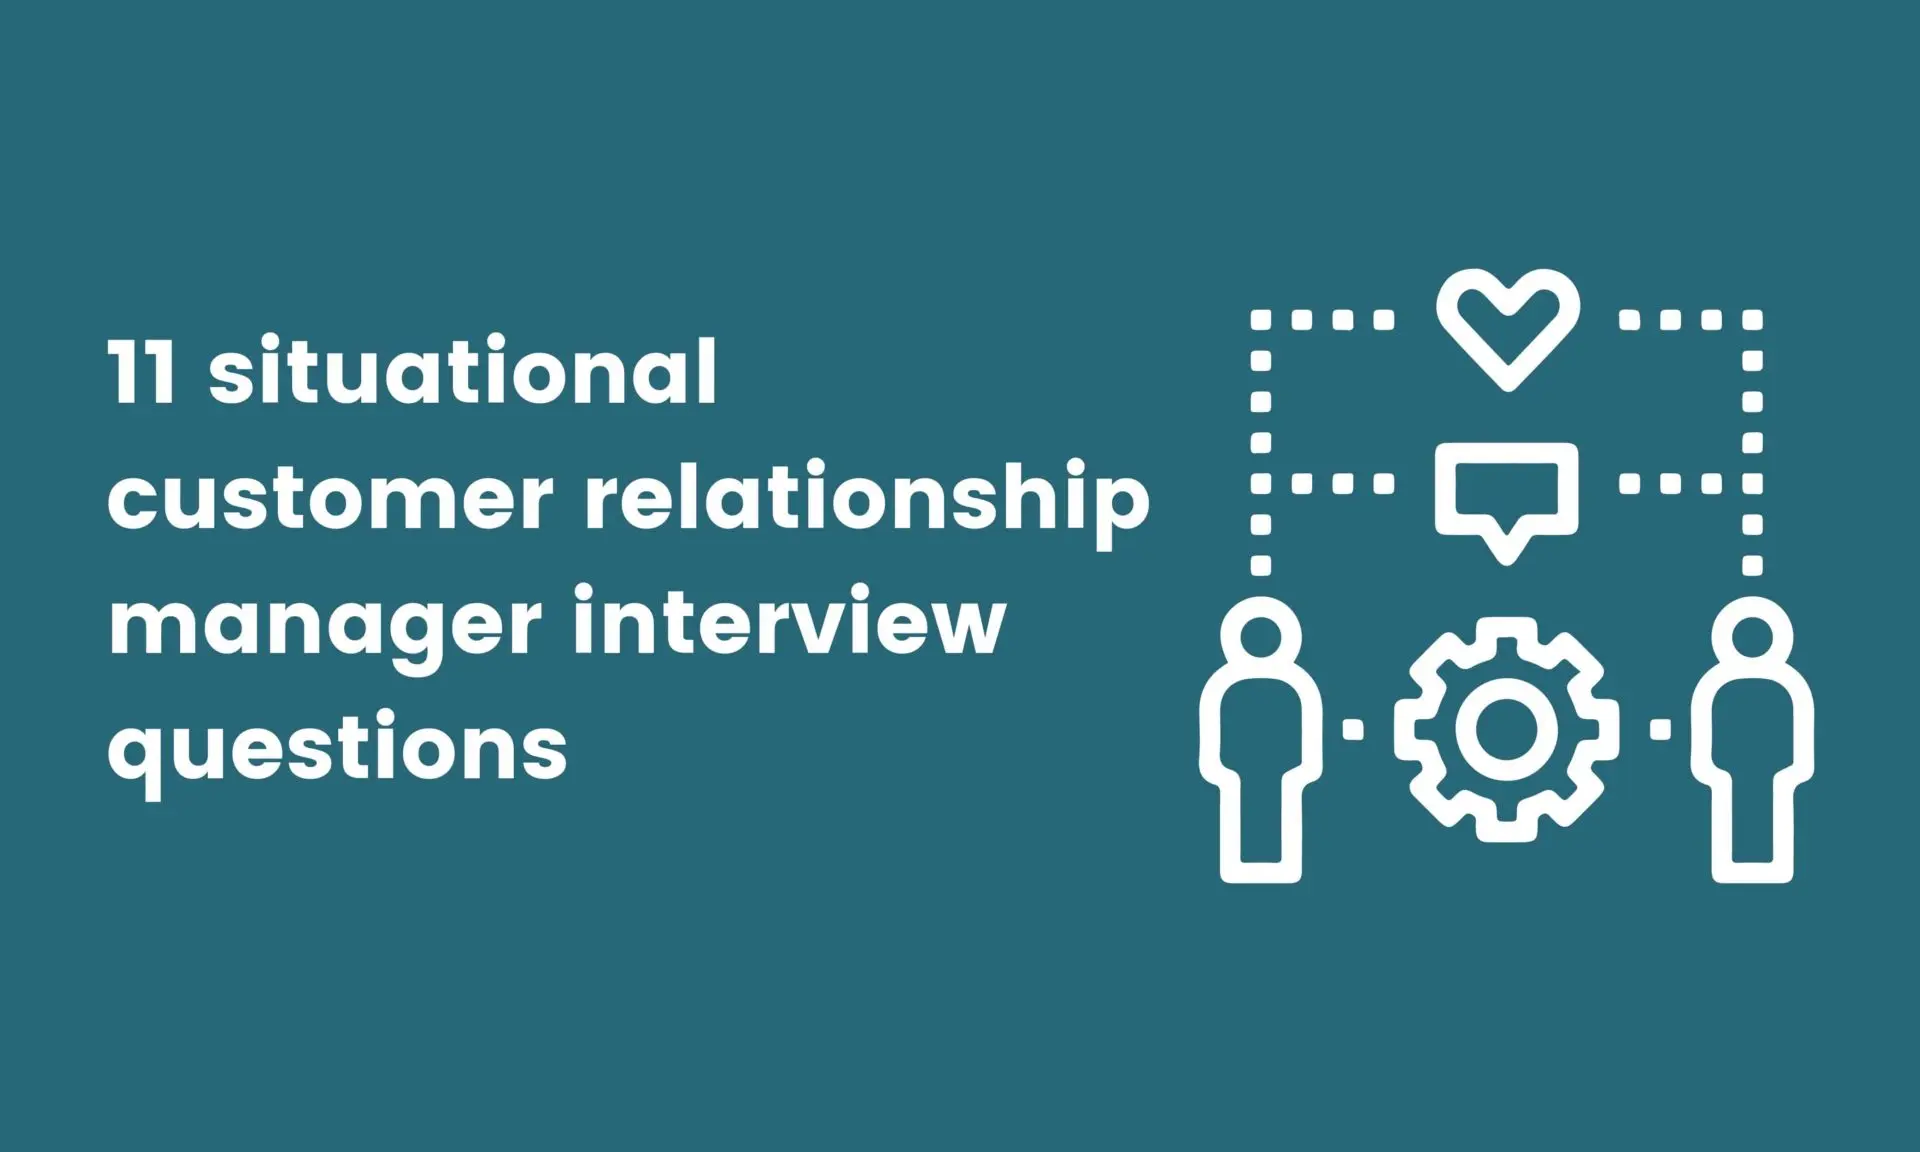 11 situational customer relationship manager interview questions